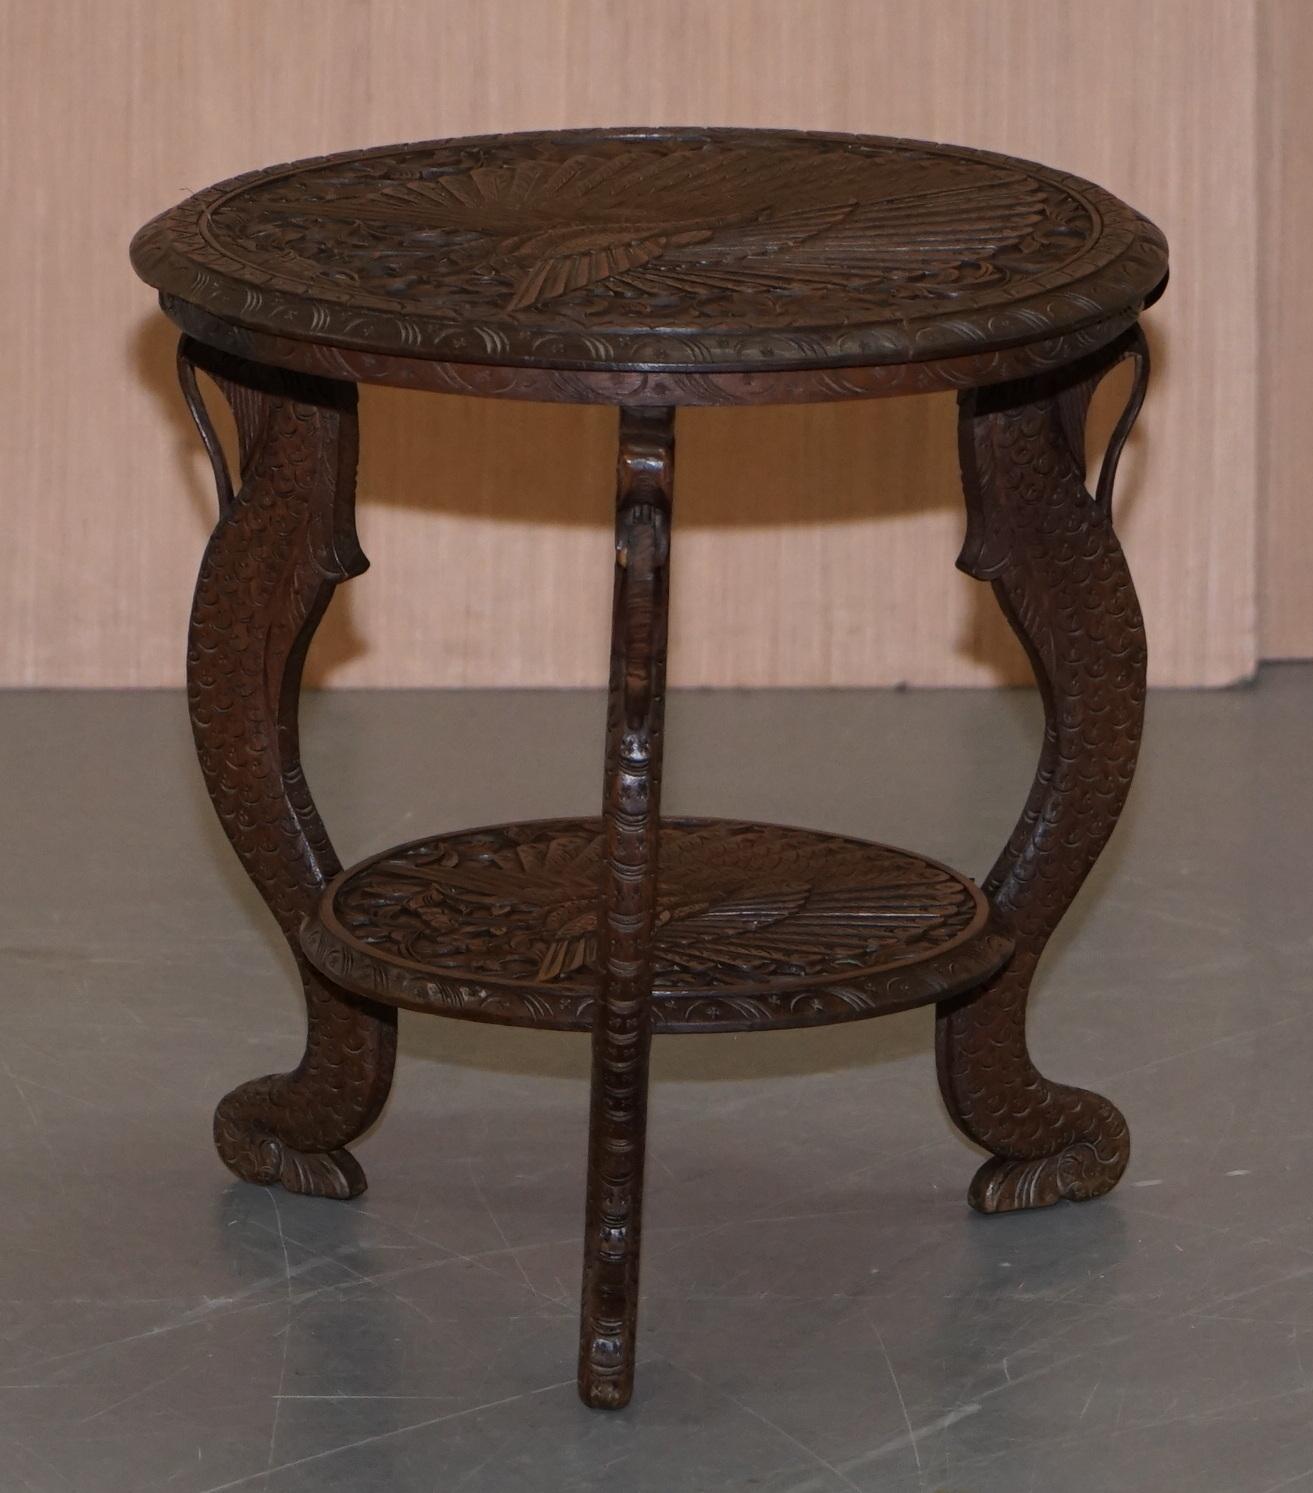 We are delighted to offer for sale this absolutely stunning original circa 1880 Burmese hand carved side table with lovely peacock design

A very good looking and ornate piece of art furniture, these were made as export pieces in the Victorian